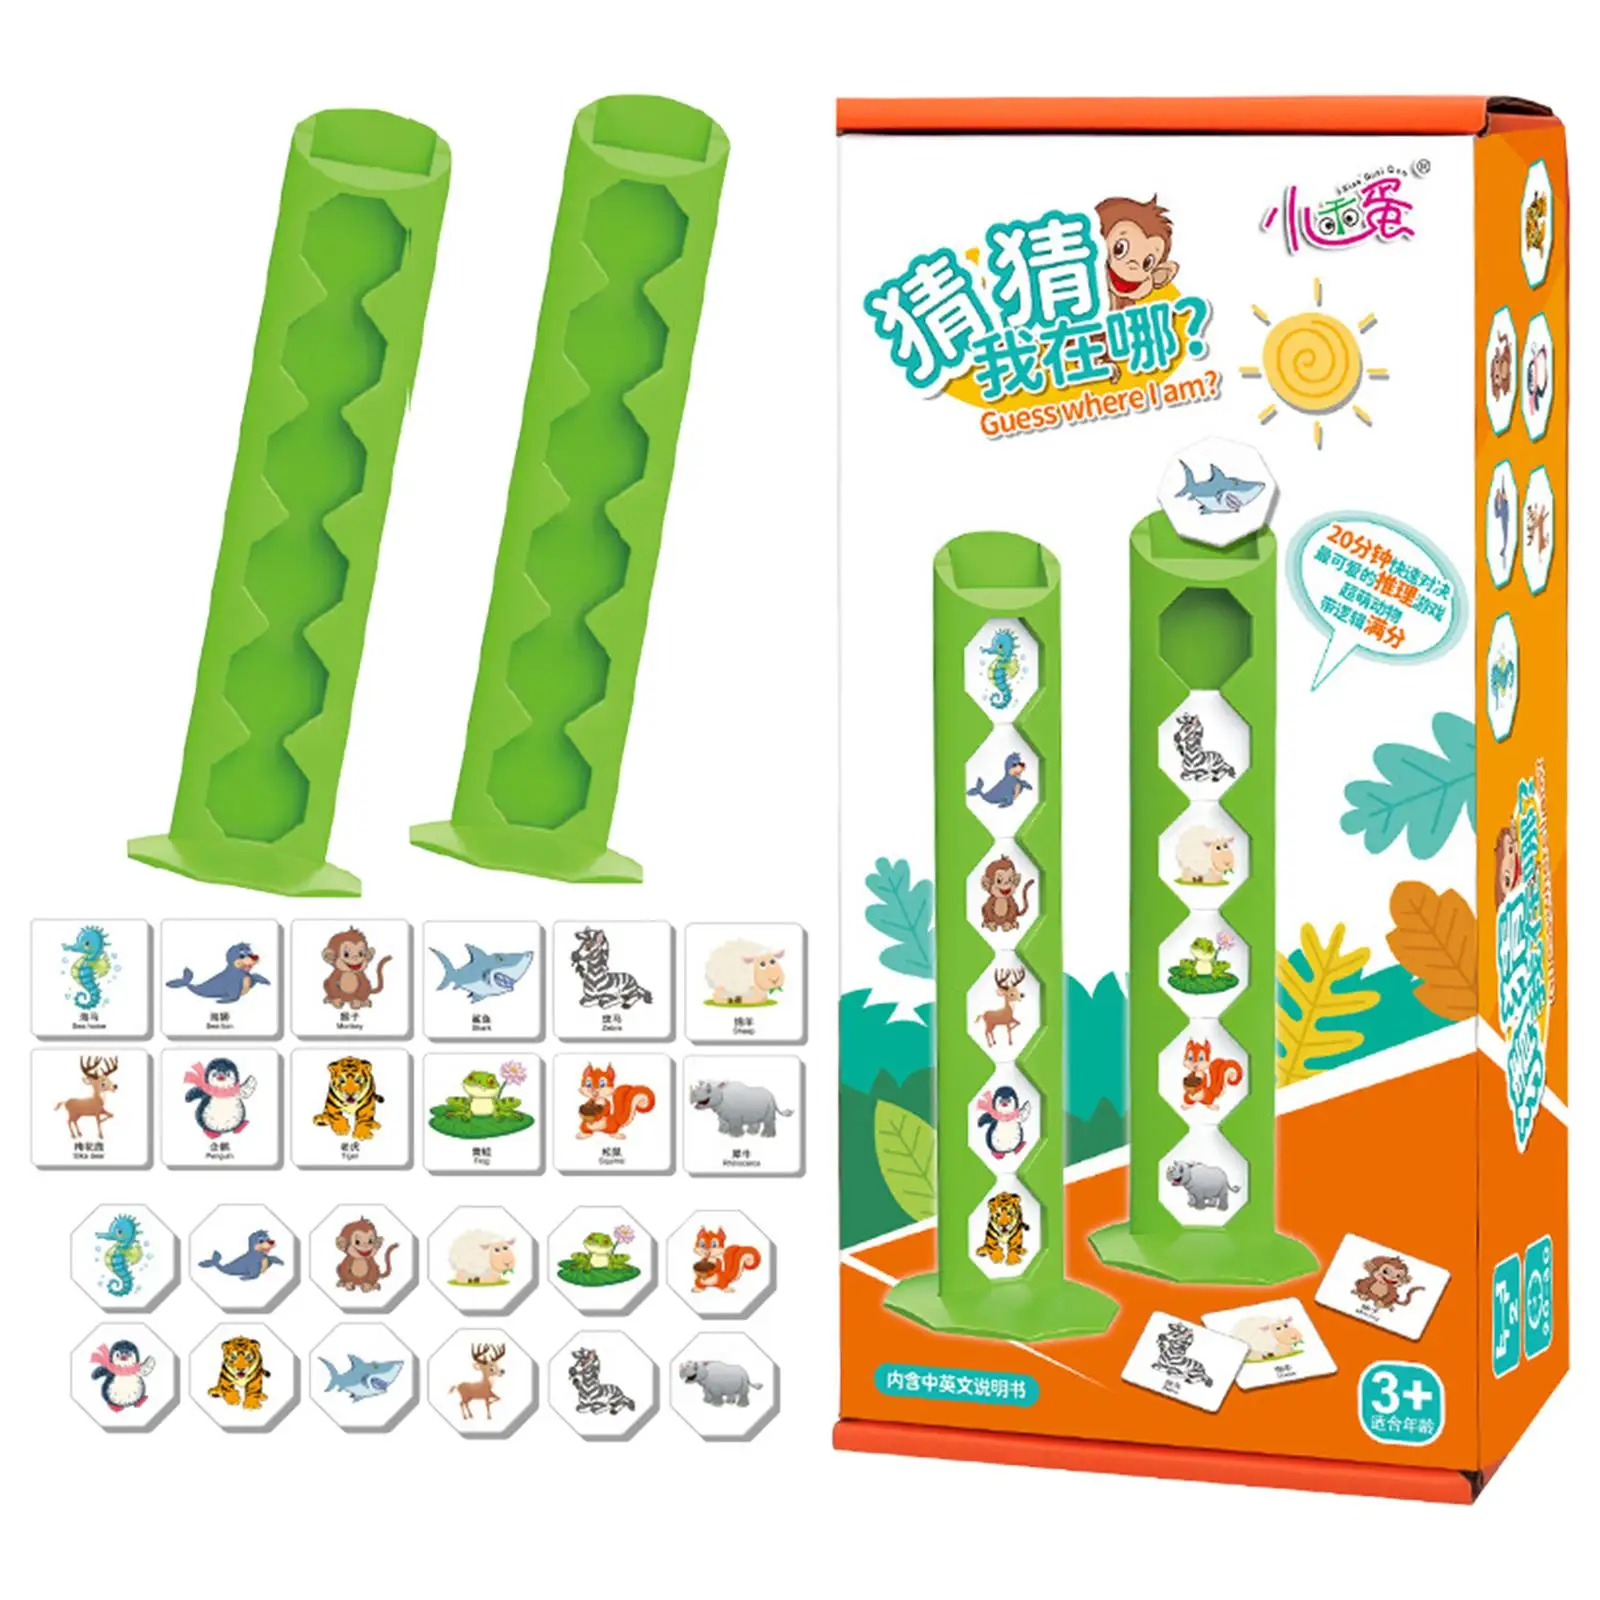 Guessing Game for Kids Funny Character Card for Family Game Gifts Party Prop